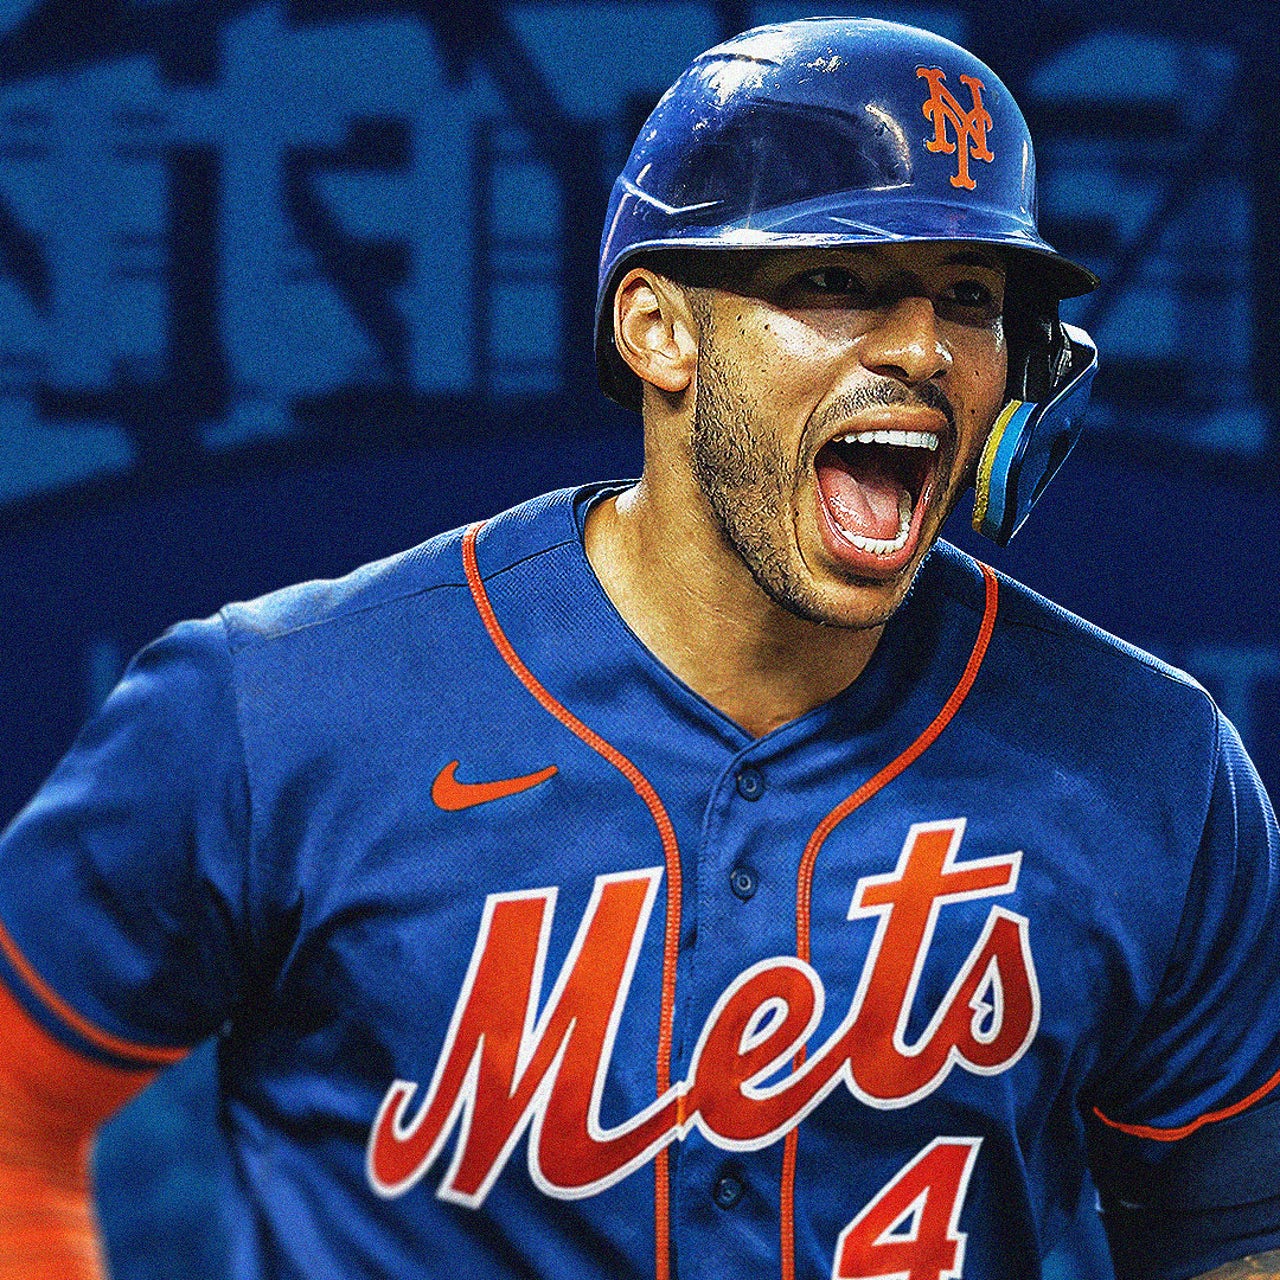 Mets' Carlos Correa pivot the biggest flex yet by opportunistic